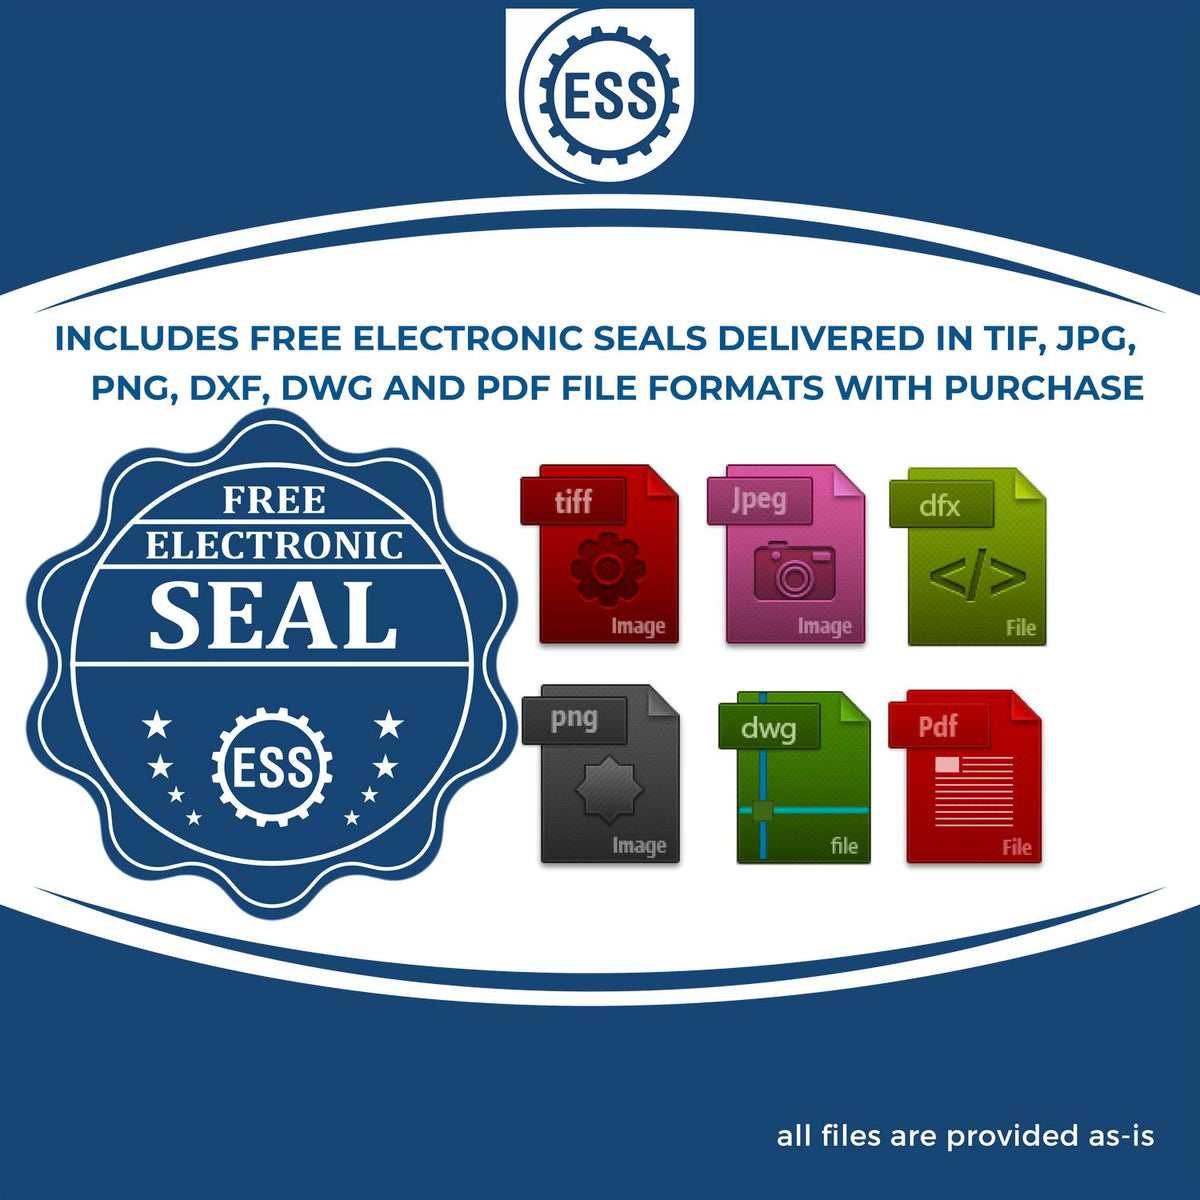 An infographic for the free electronic seal for the State of Georgia Extended Long Reach Engineer Seal illustrating the different file type icons such as DXF, DWG, TIF, JPG and PNG.